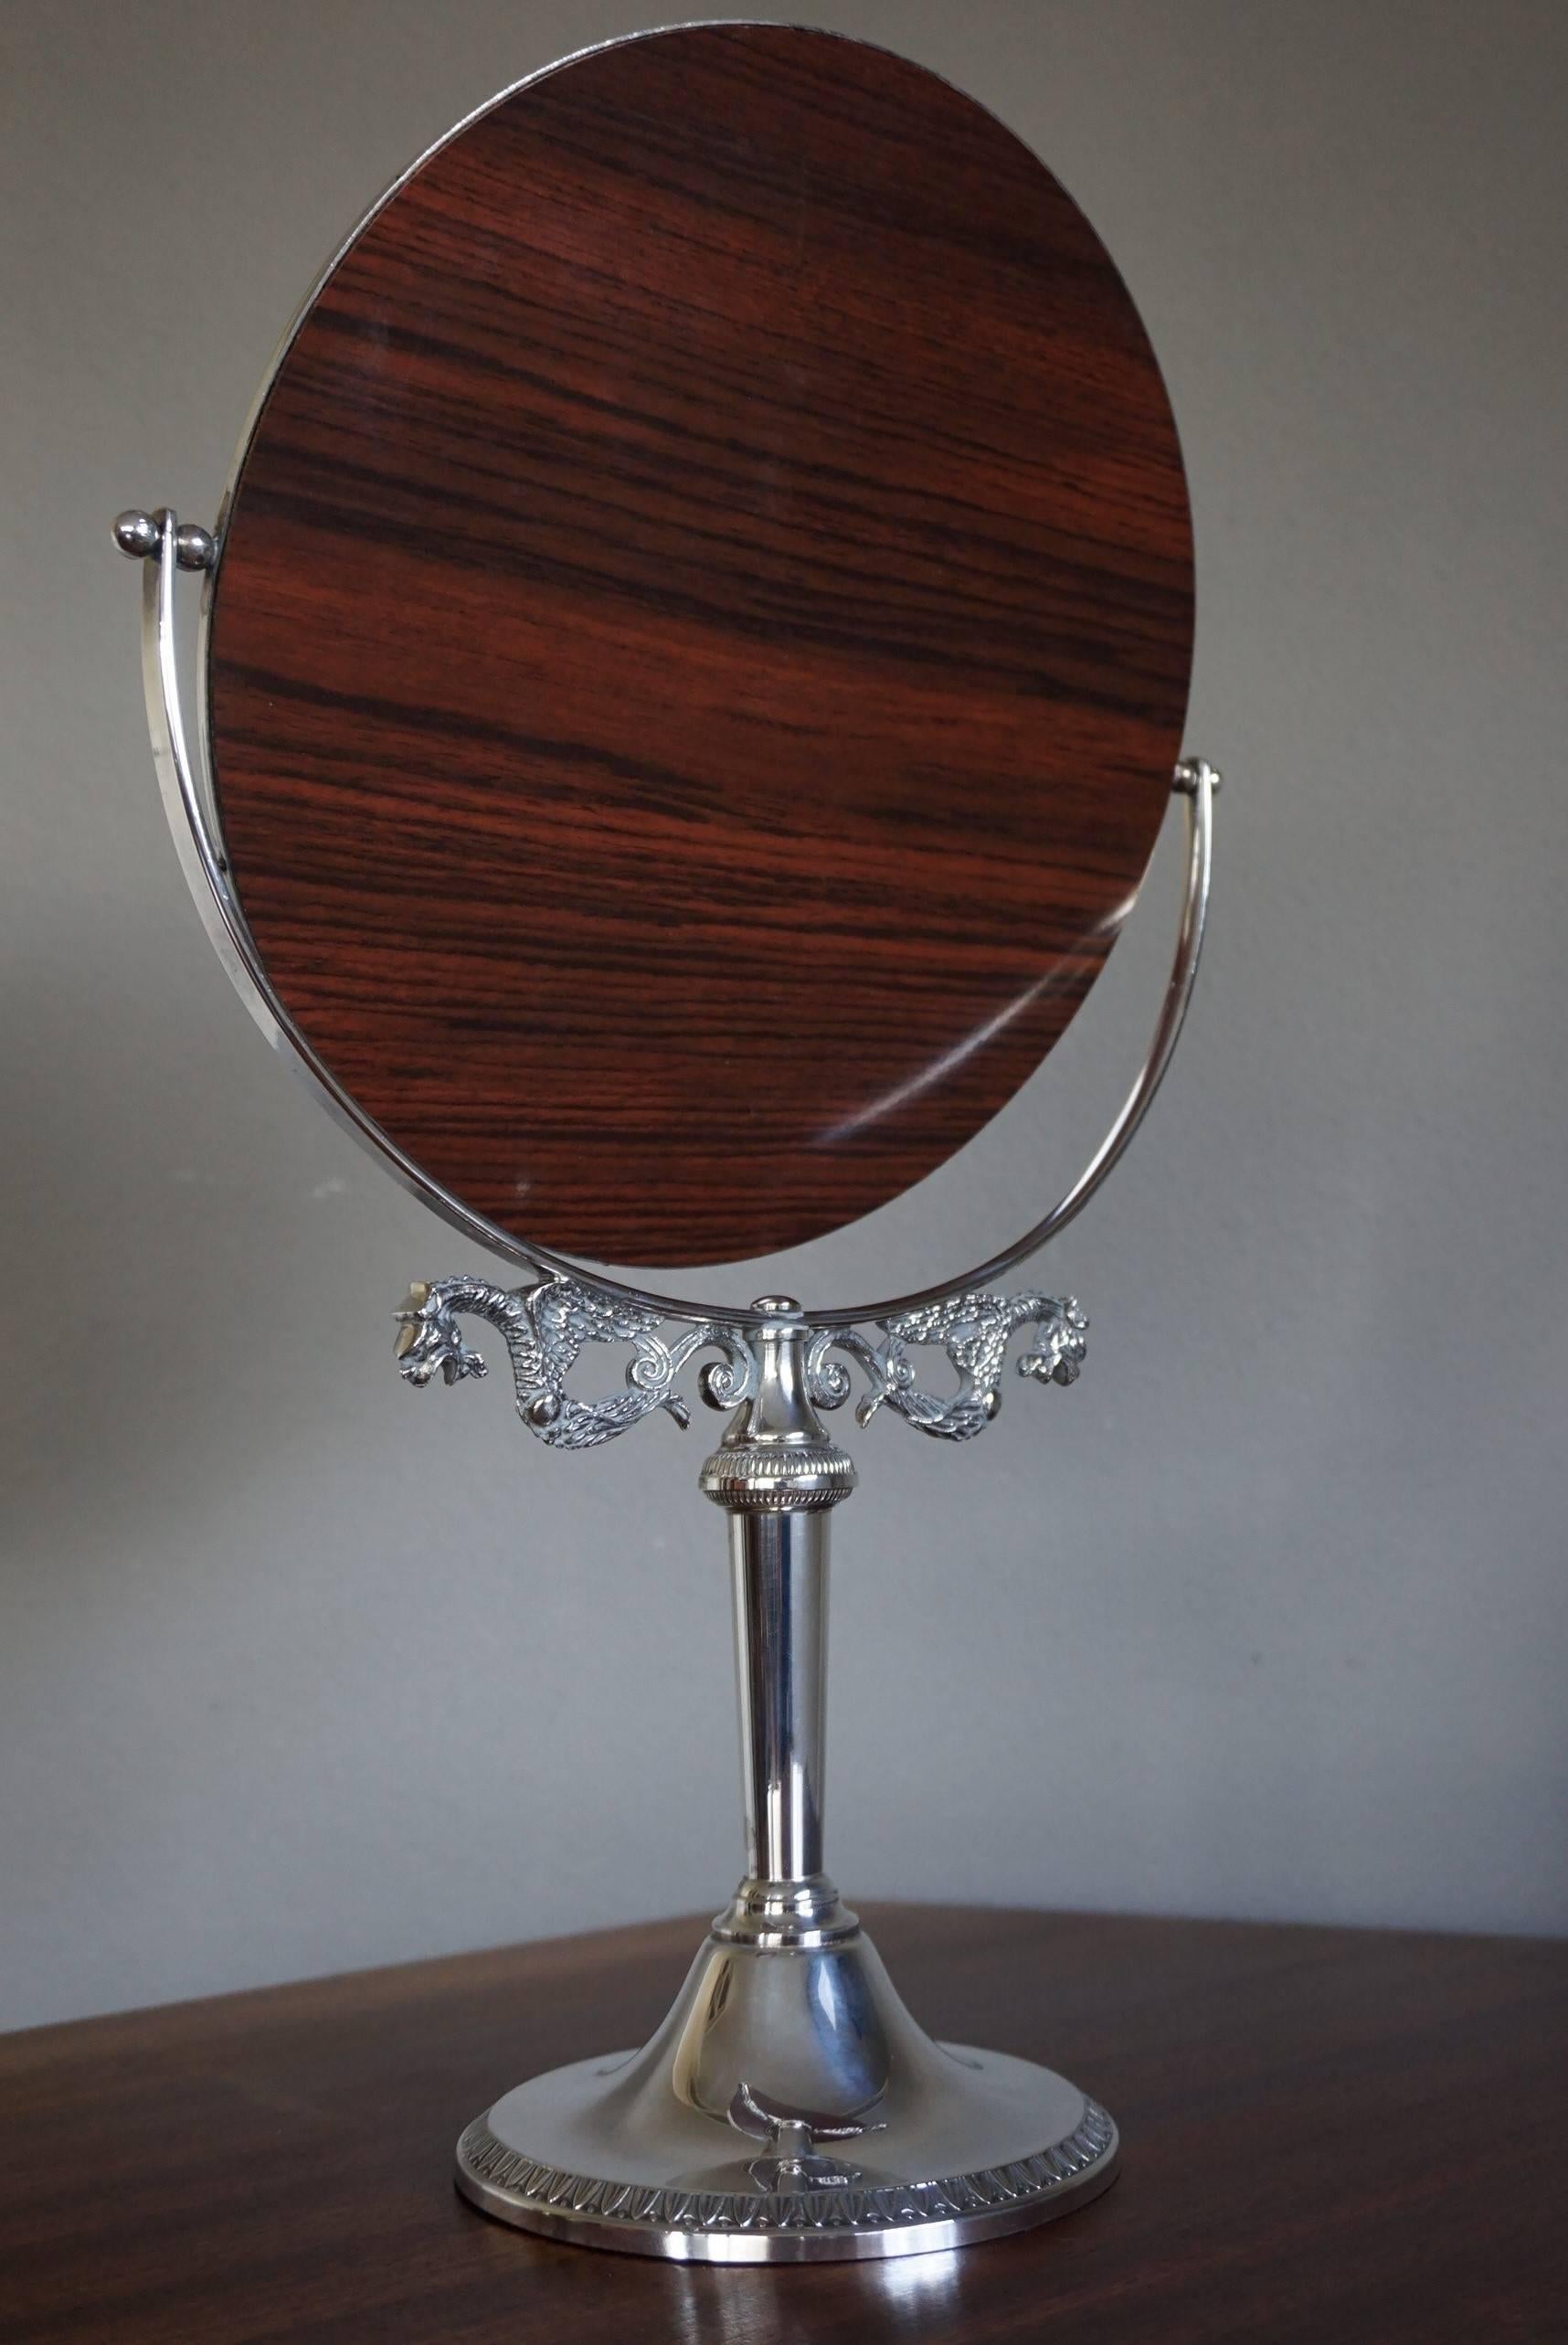 Rare, good looking and practical table mirror.

From a local silver and jewelry dealer who is retiring we acquired this wonderful and highly practical table mirror. Thousands of people have looked into this mirror to see if the jewelry they wanted